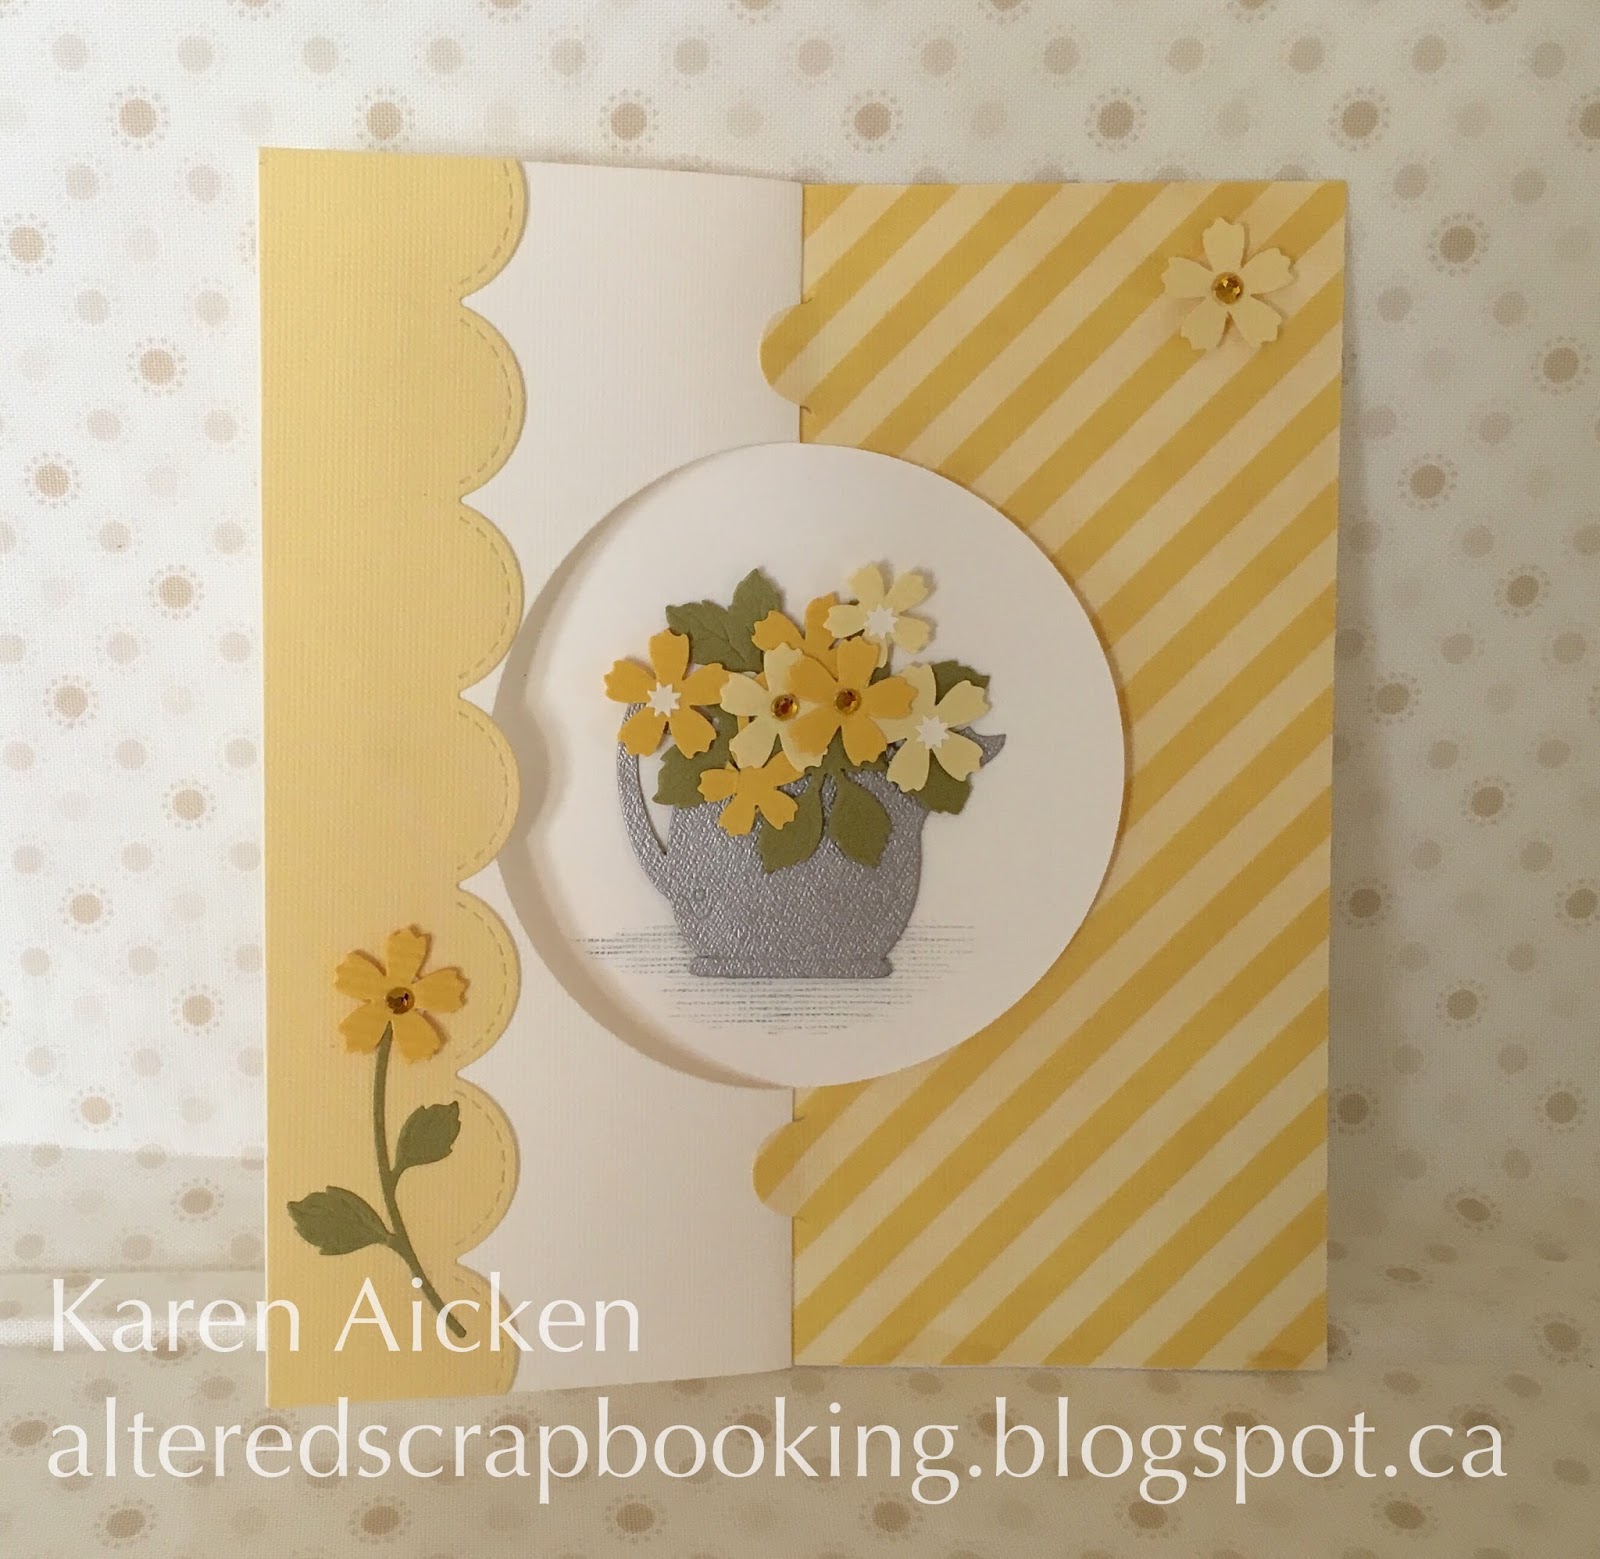 Altered Scrapbooking: Four Yellow Flip Cards